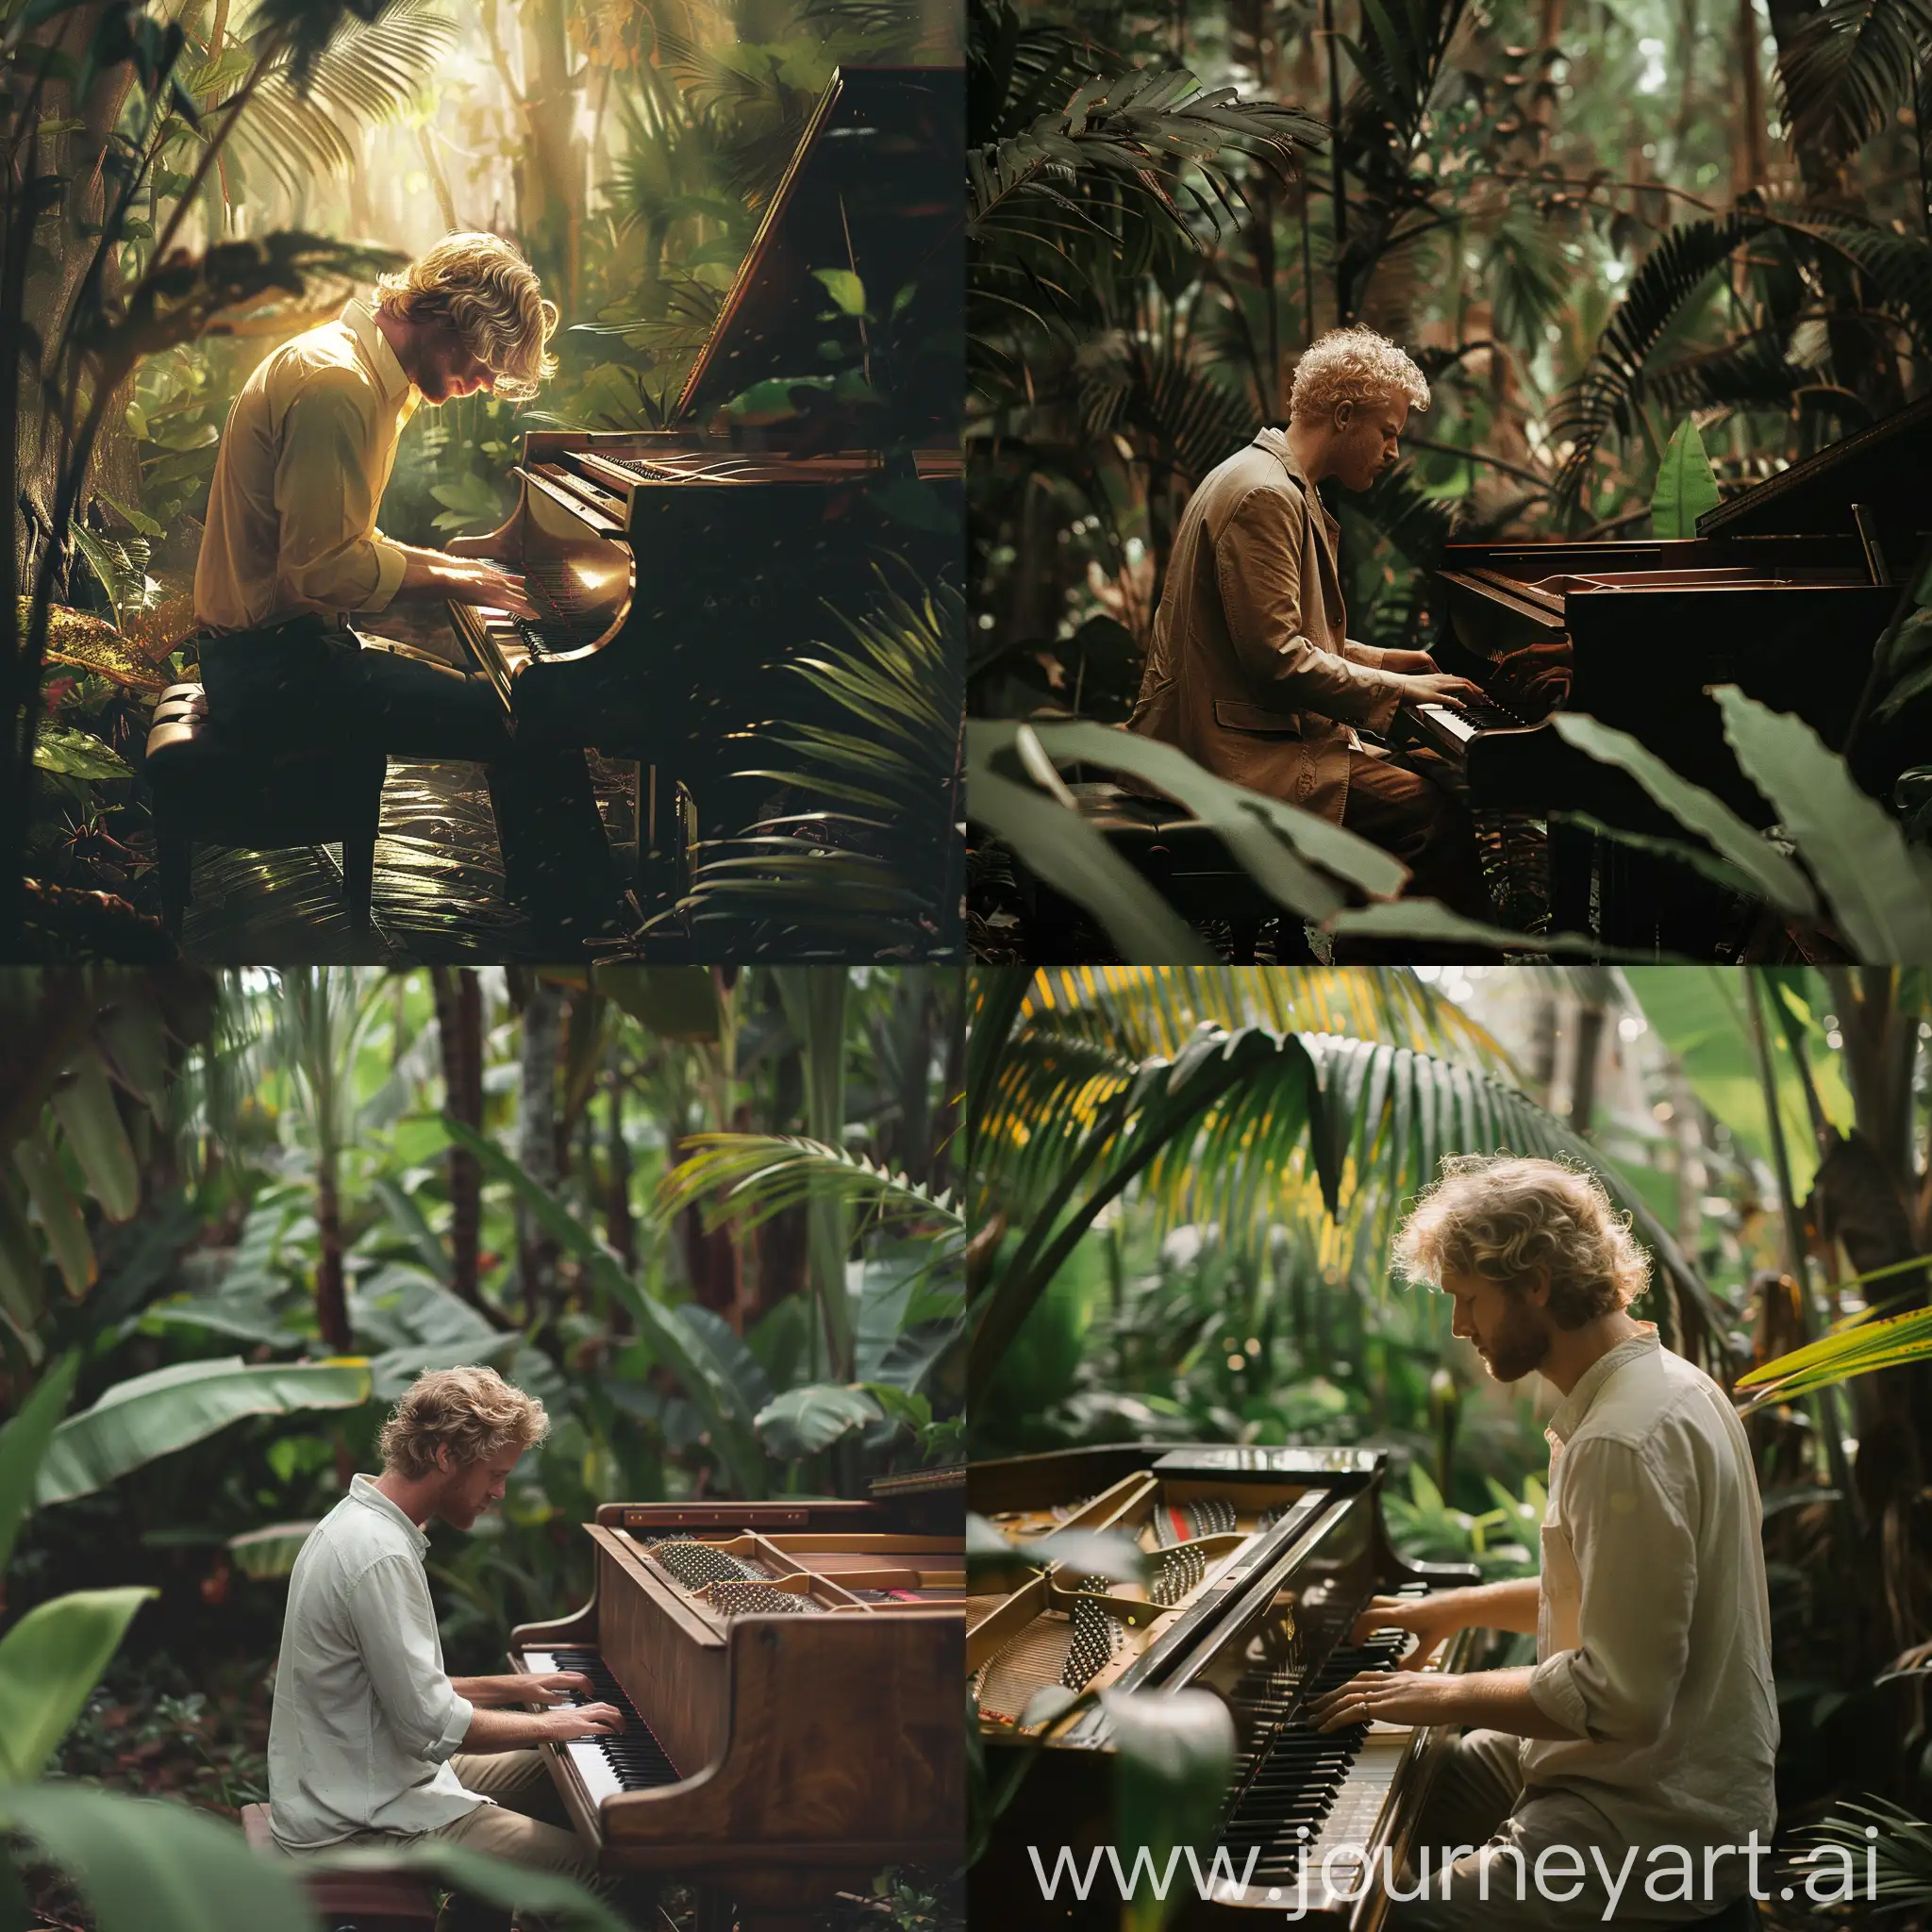 BlondHaired-Pianist-Performing-in-Lush-Jungle-Setting